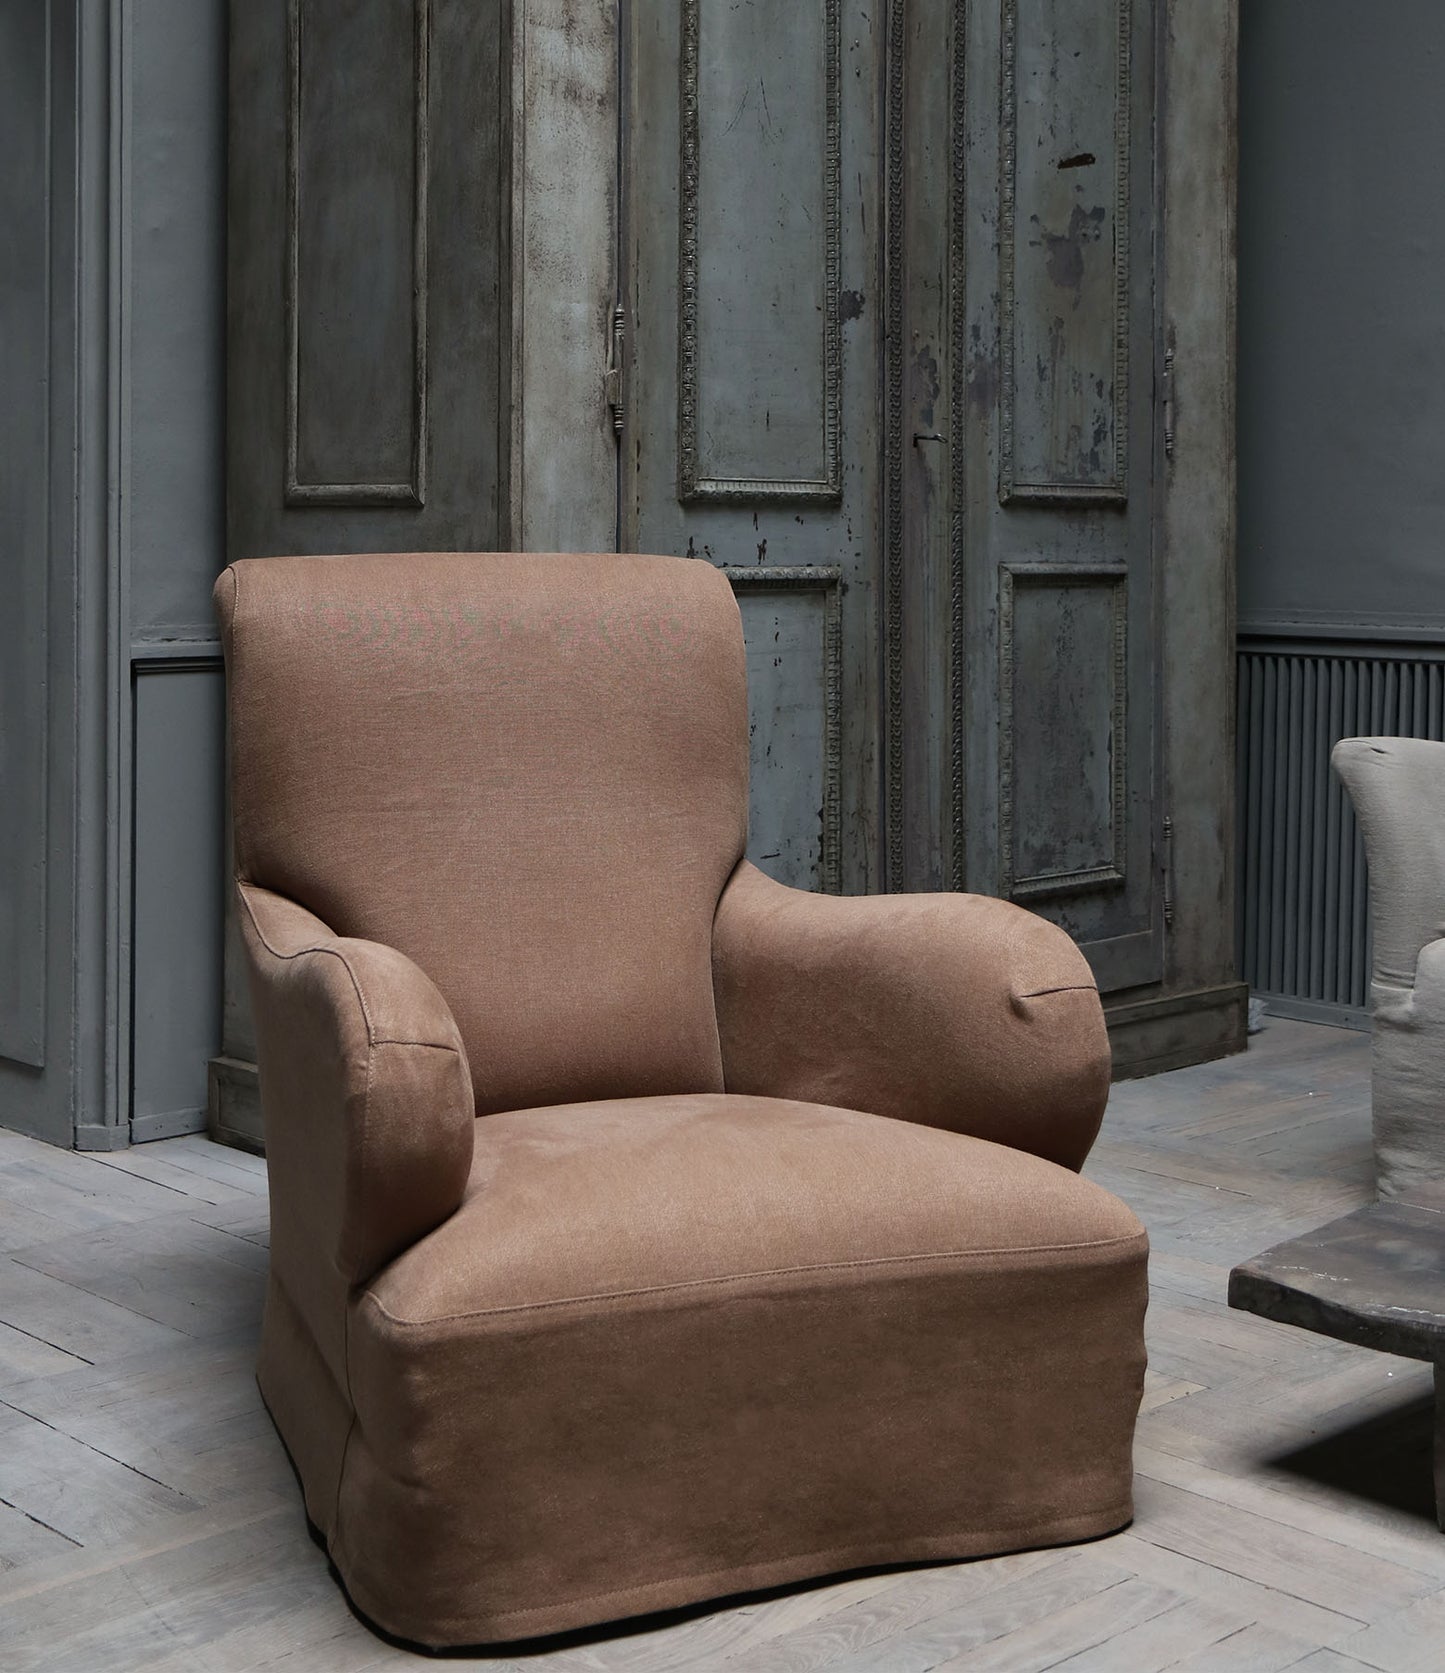 KING ARMCHAIR BY OLIVER GUSTAV